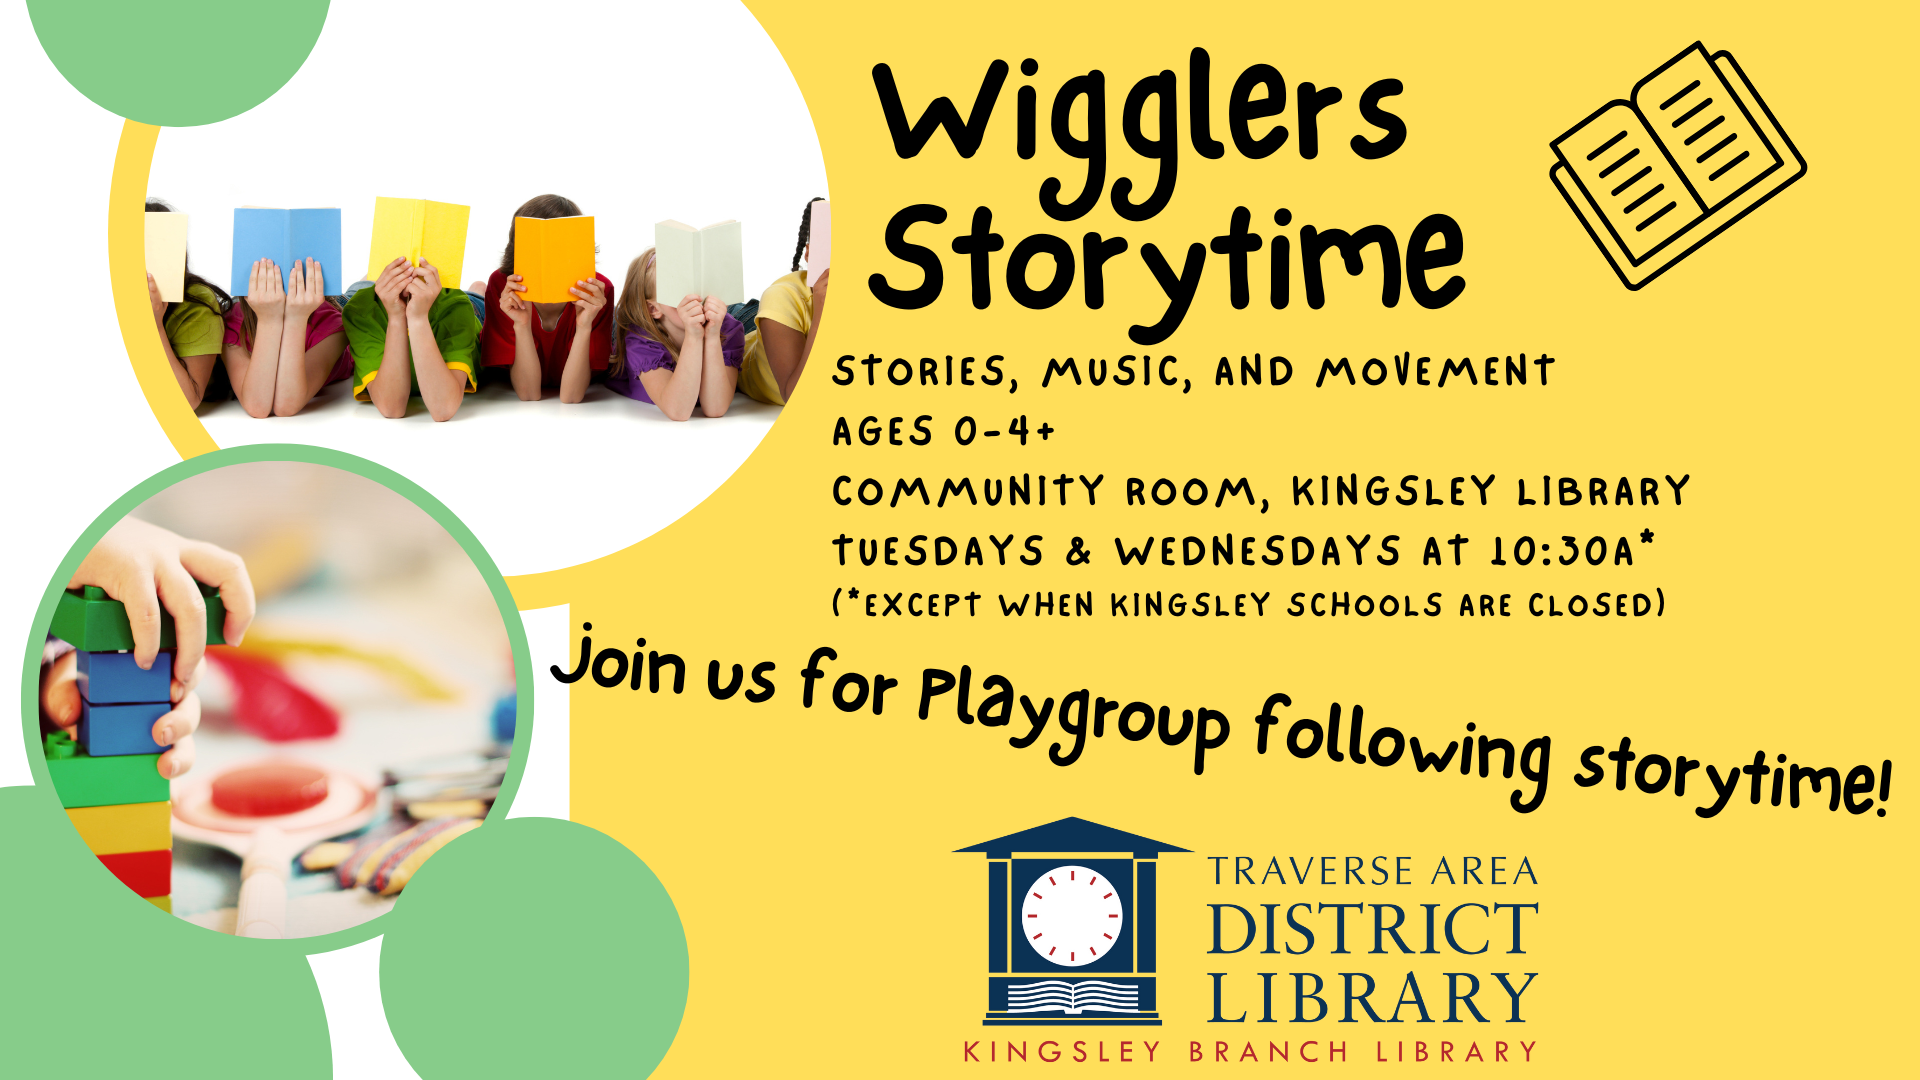 Wigglers Storytime and playgroup, every Tuesday and Wednesday 10:30a to 11a